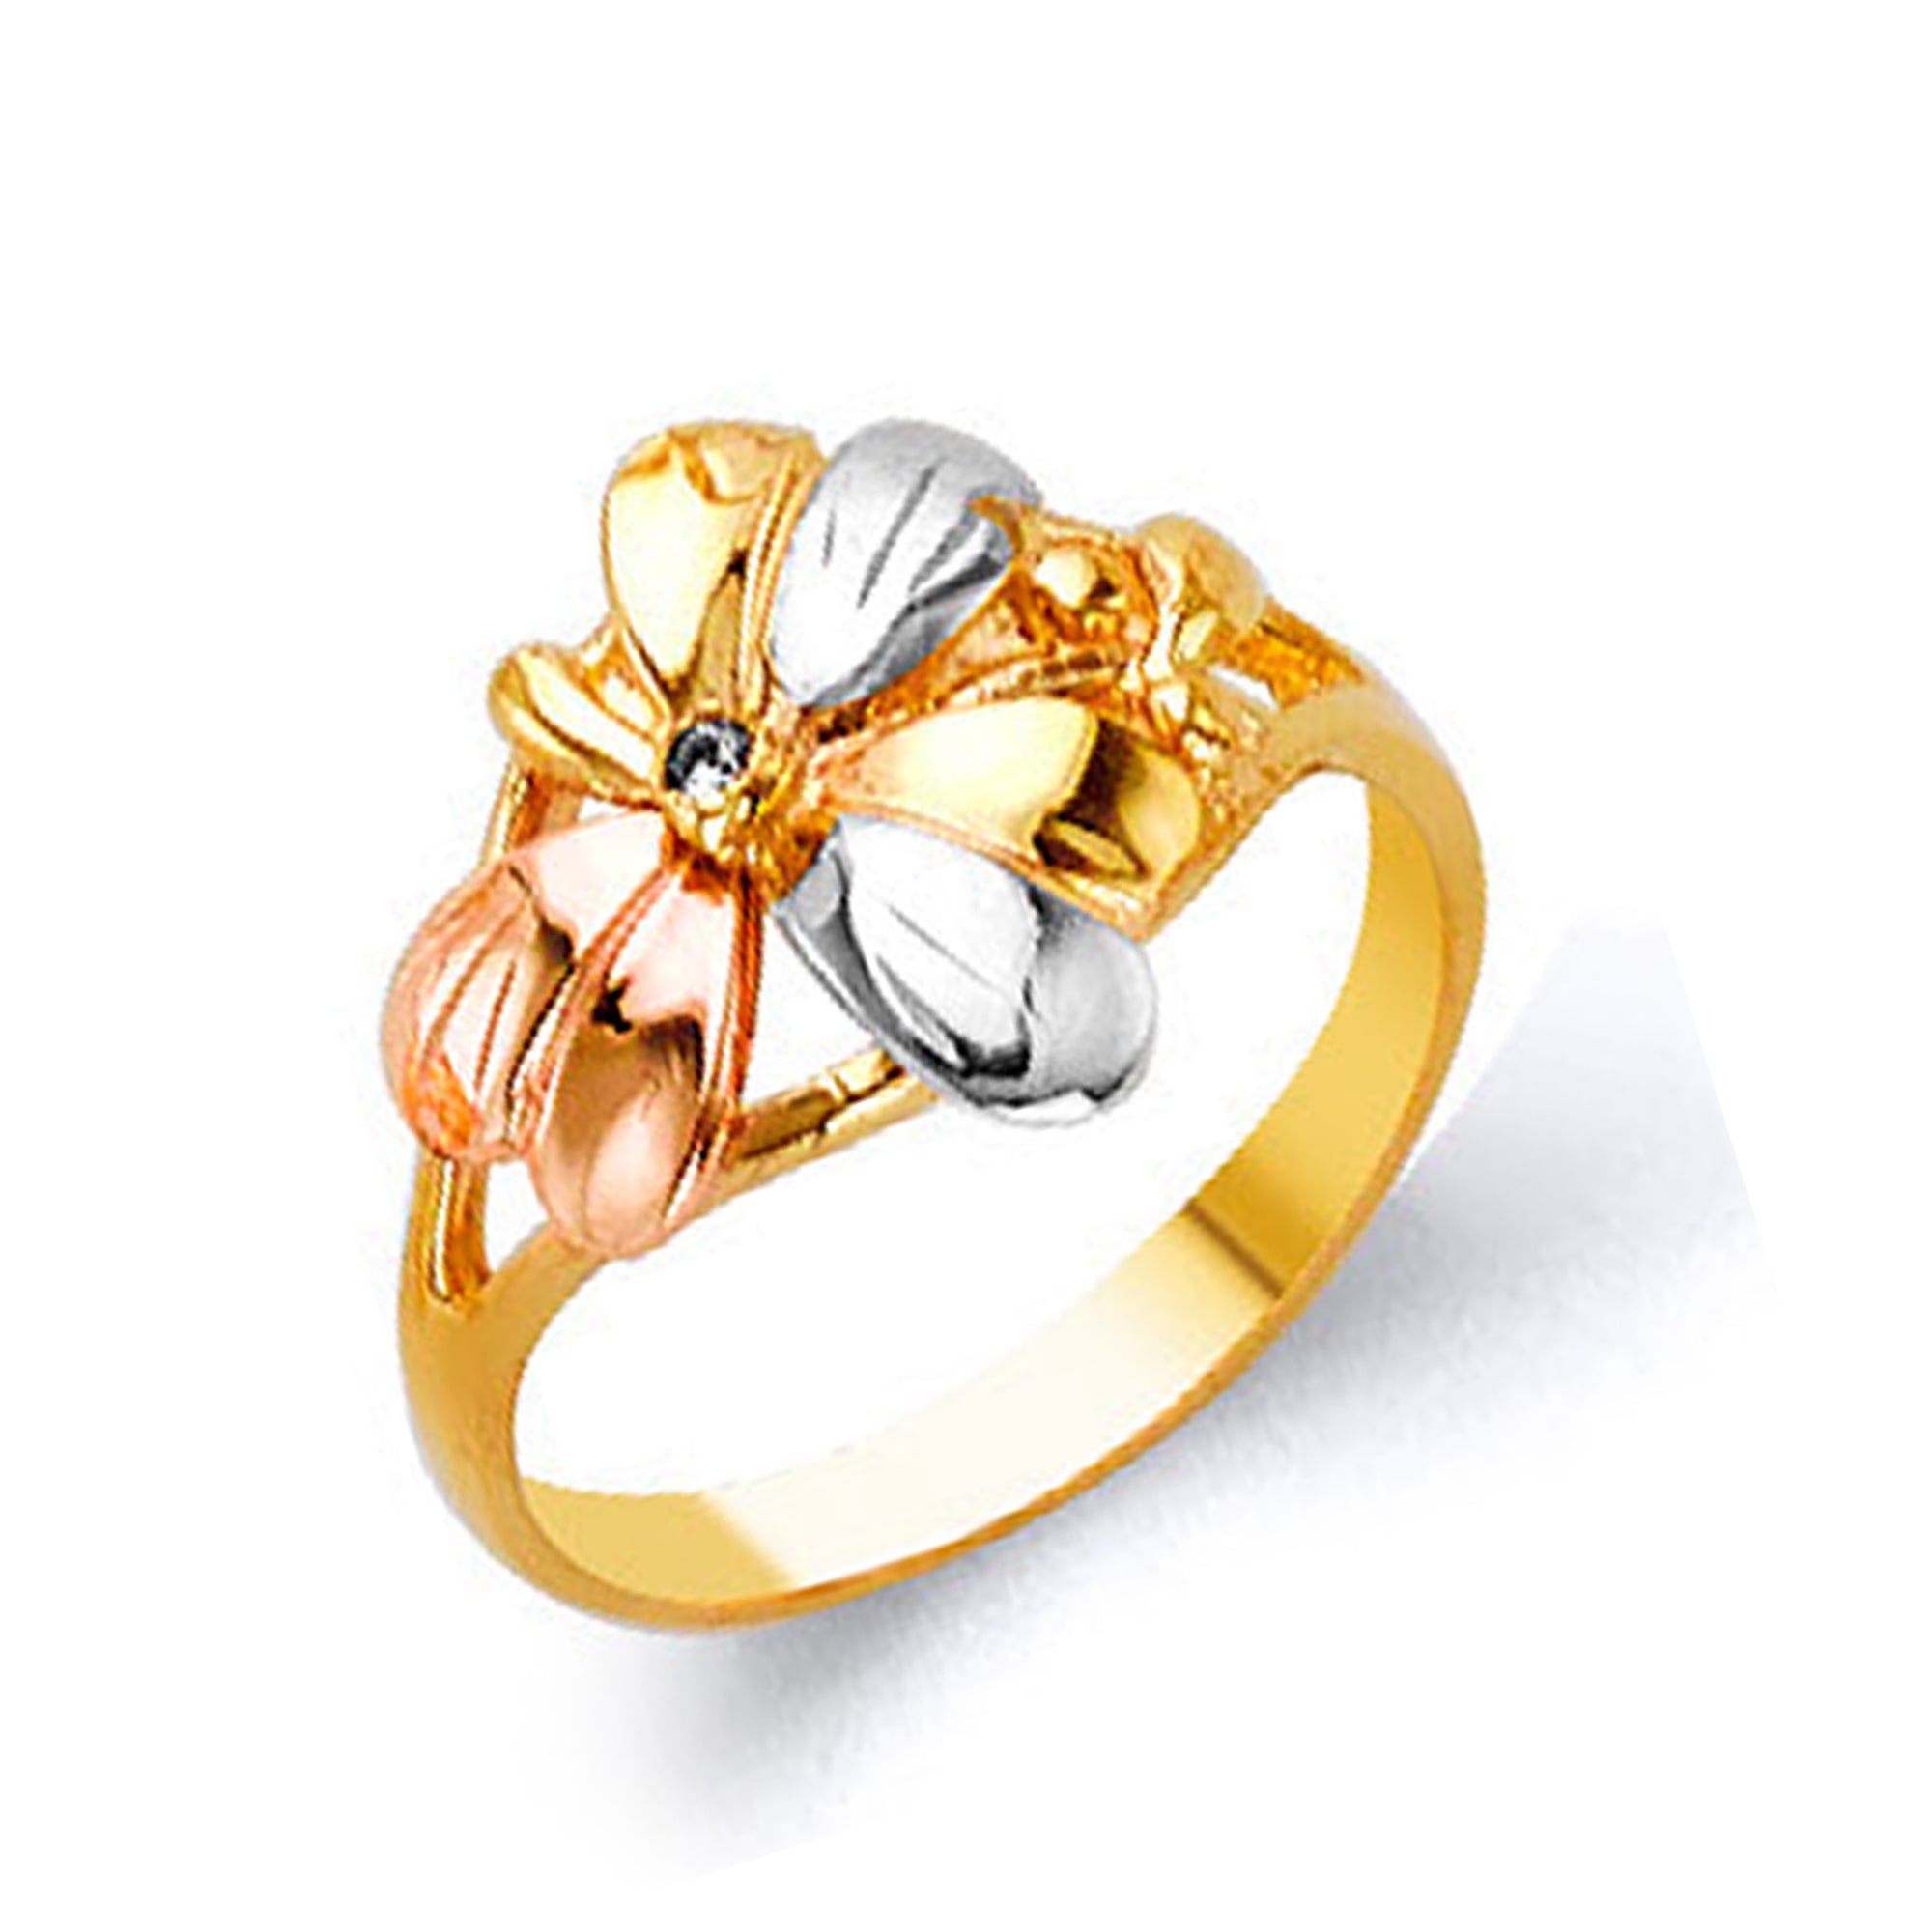 Floral Bow Knot Ring in Solid Gold 